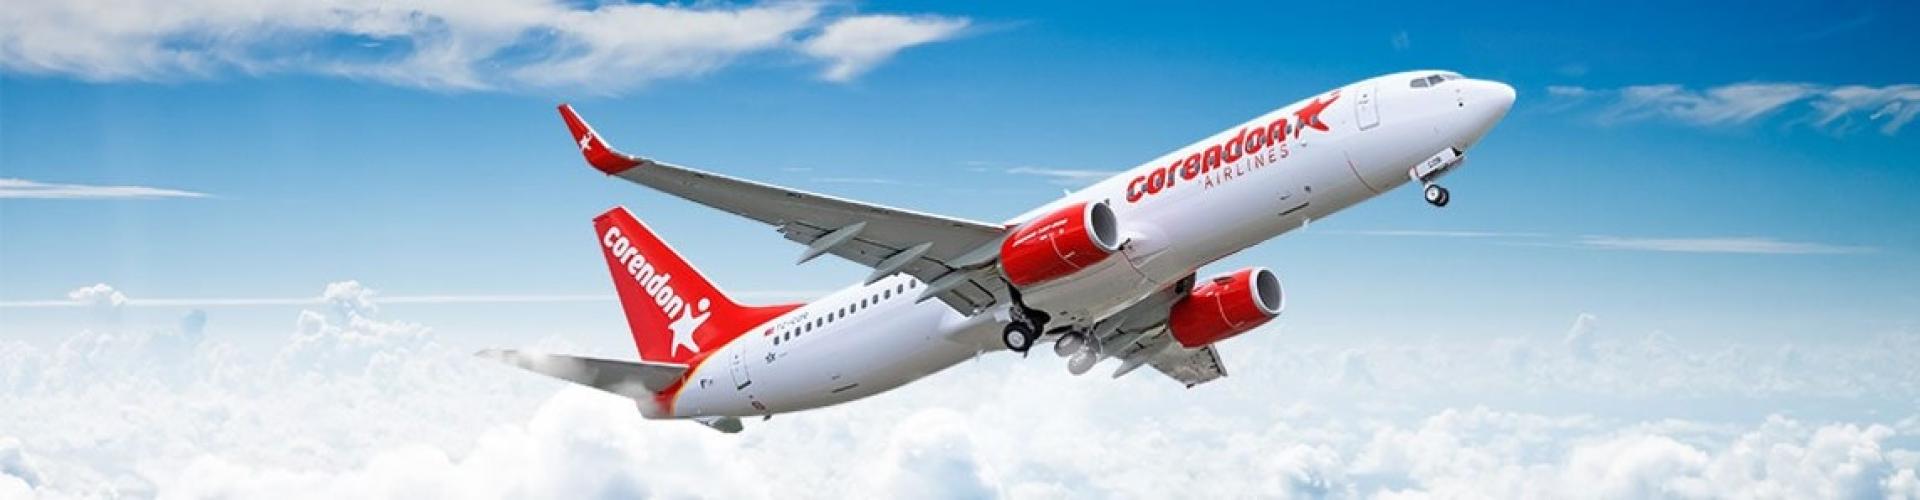 Corendon Airlines Europe cover